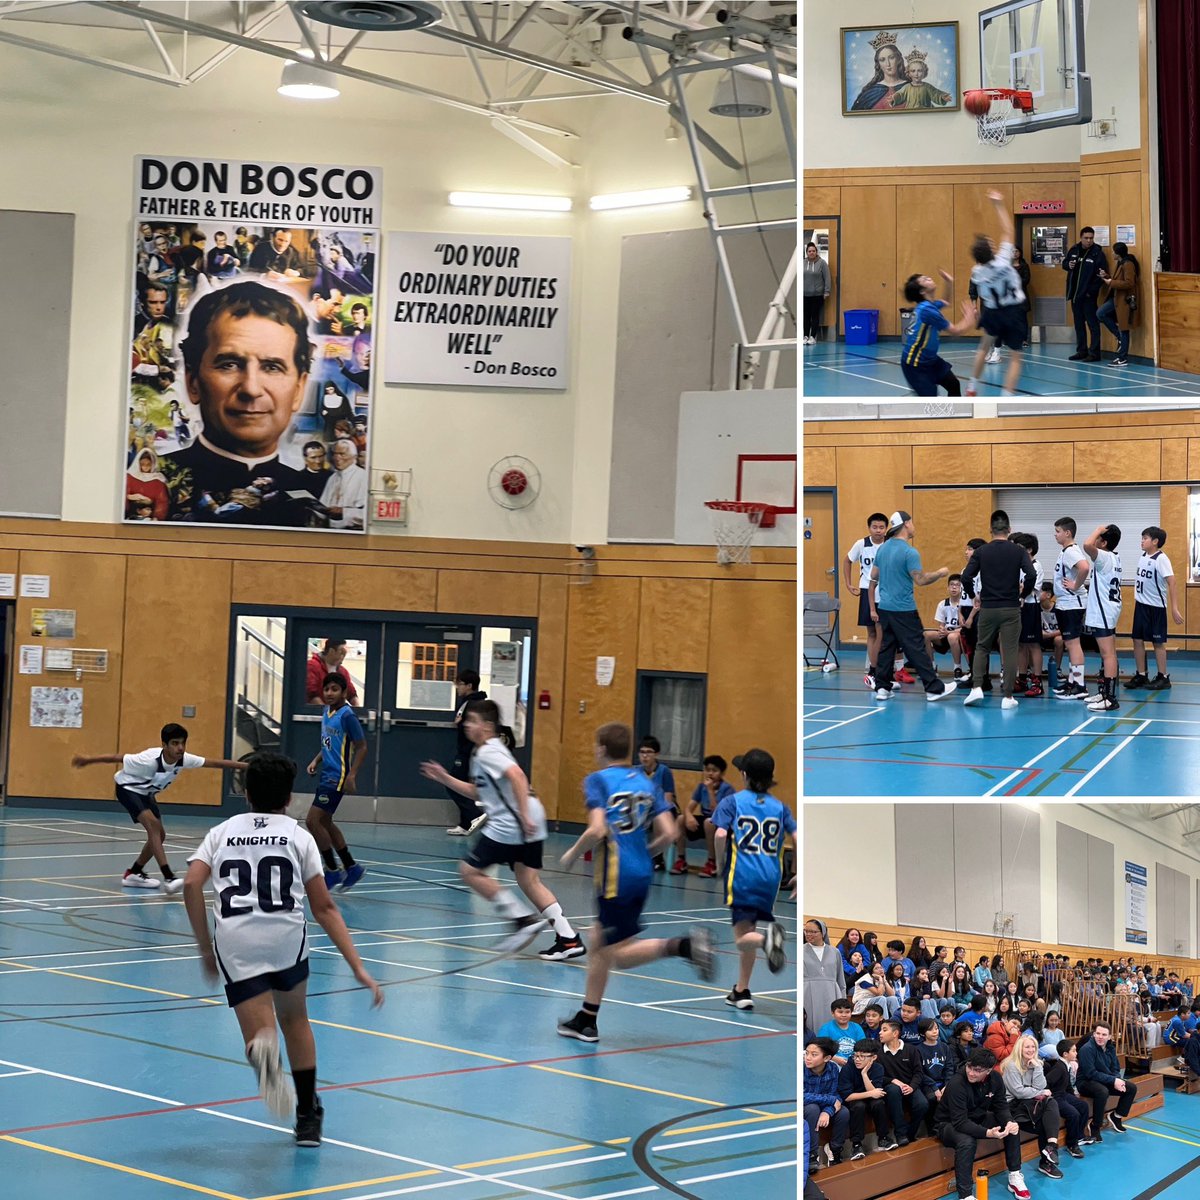 Today we are holding our Don Bosco Basketball Tournament!Lots of excitement in our Youth Centre. Six schools from around @cisva are competing. #DonBosco #olgcbestinbc #basketball